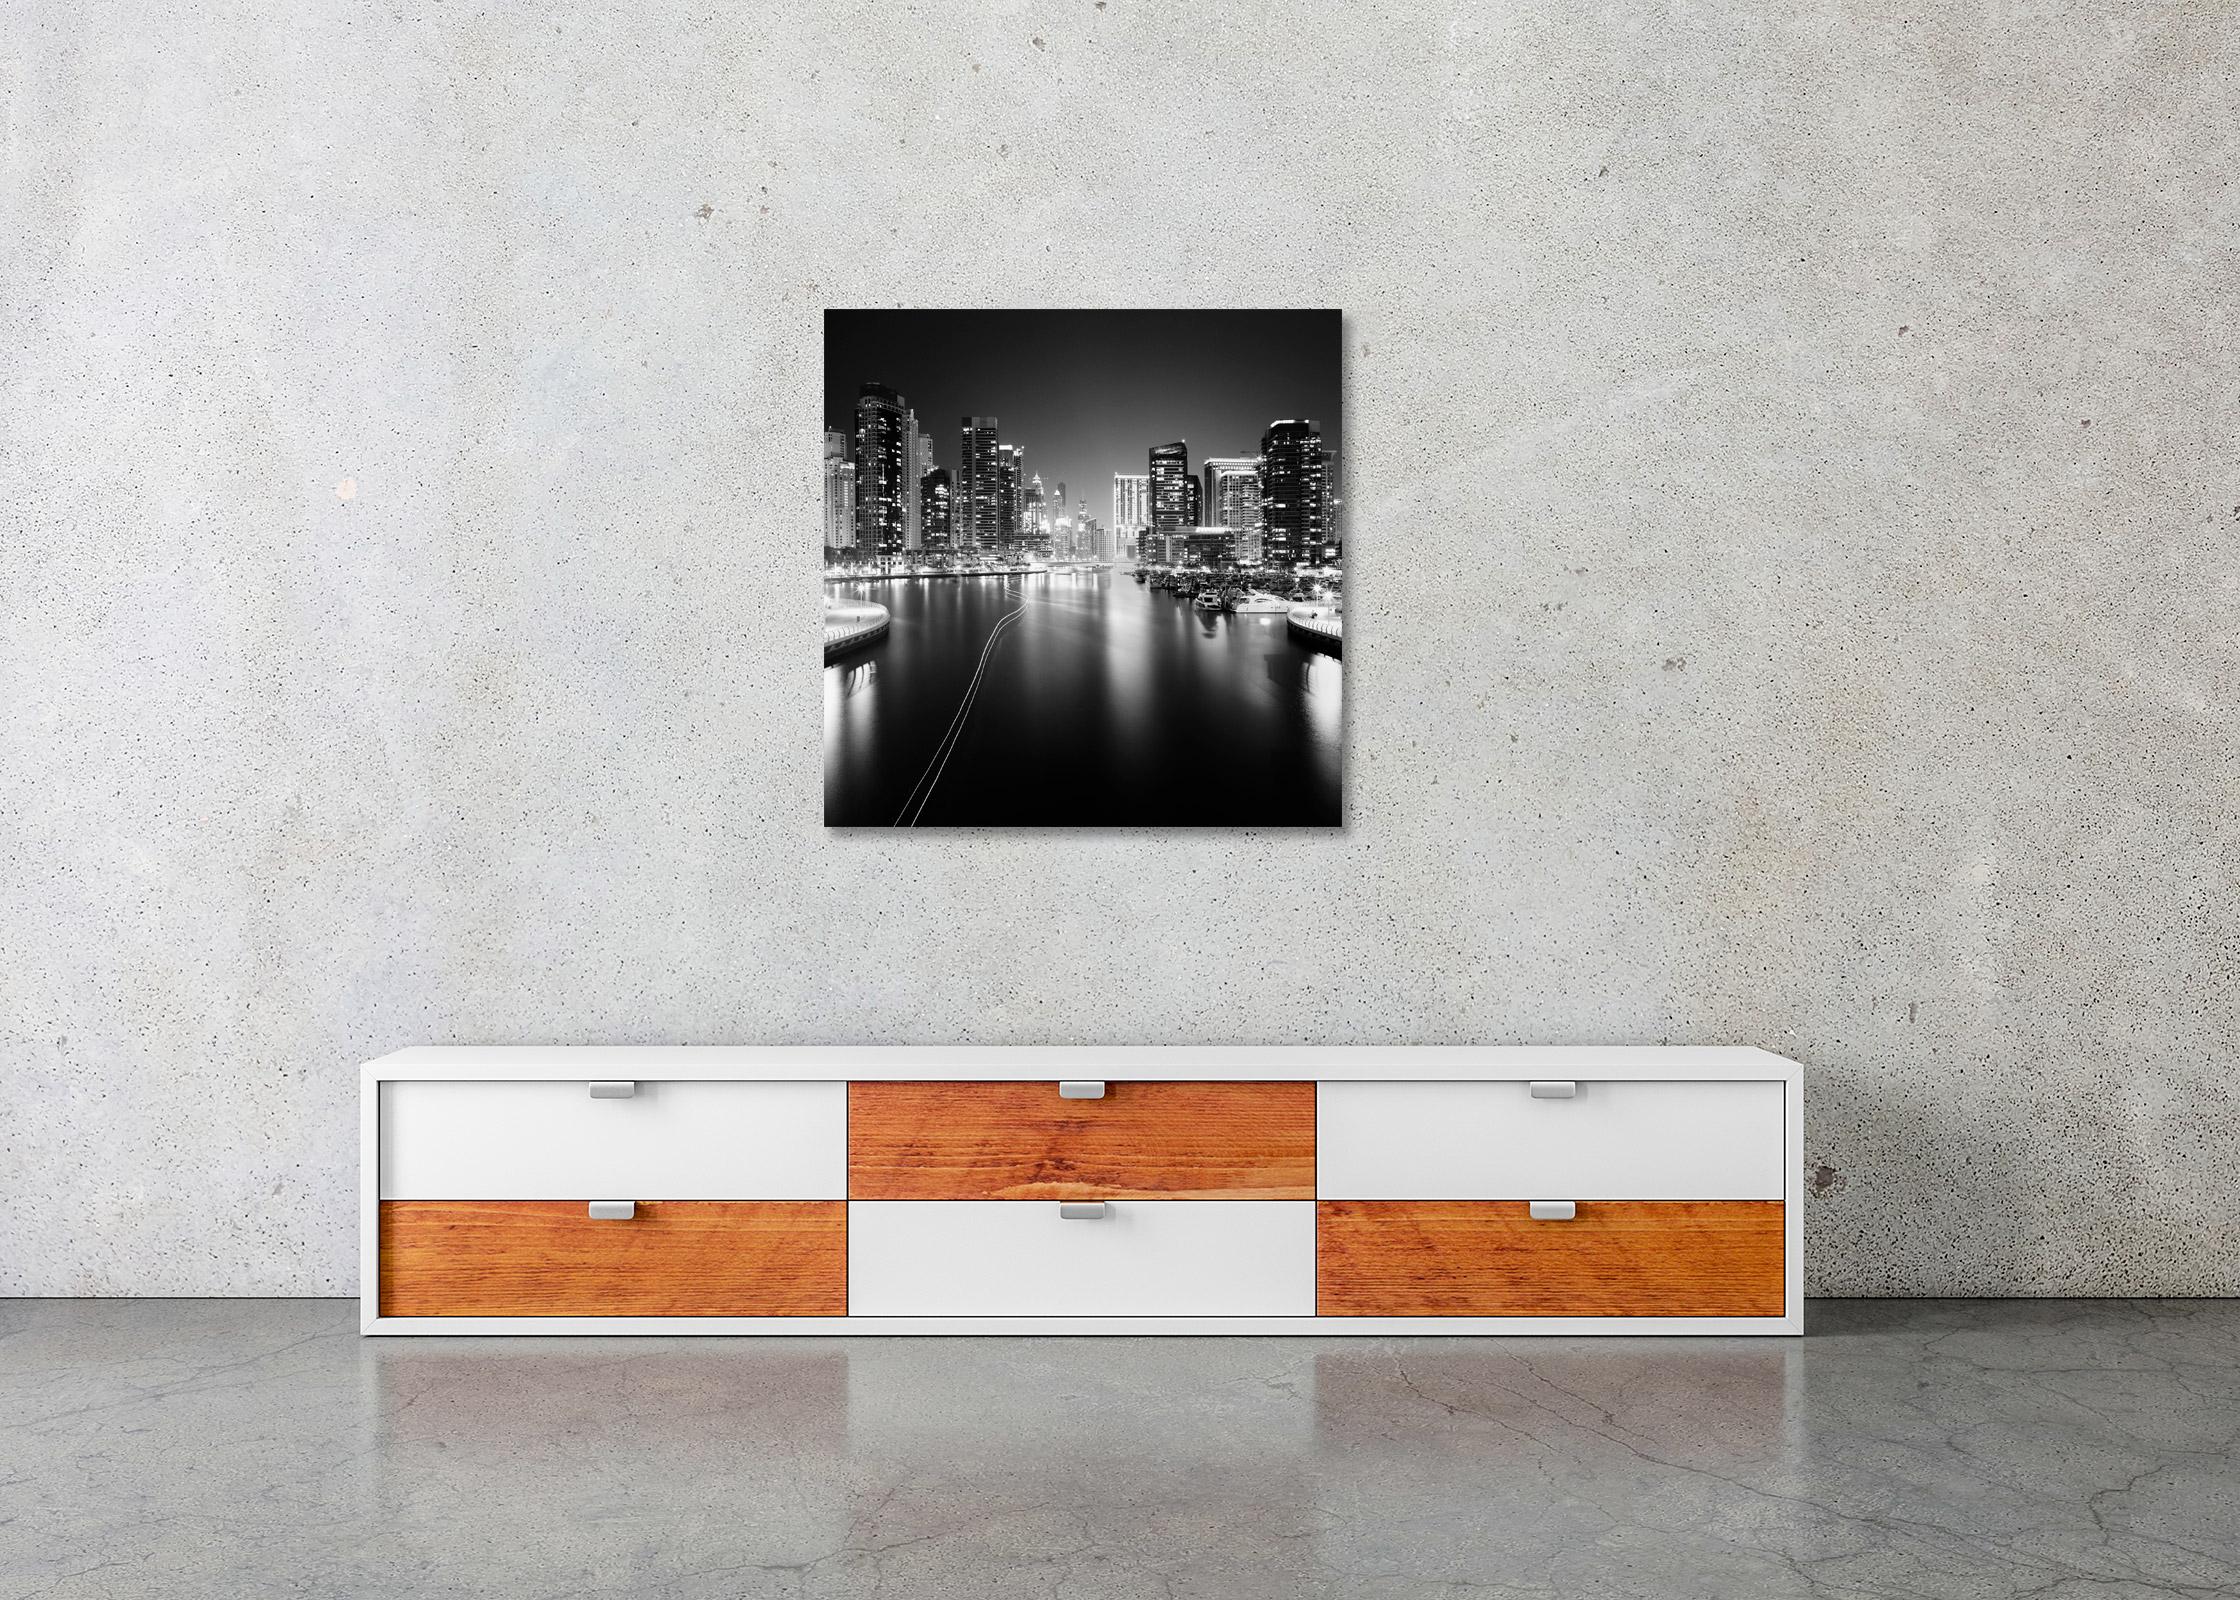 Black and White Fine Art Photography - Night view of skyscraper in Dubai Marina and Boats, Yachts. Archival pigment ink print, edition of 9. Signed, titled, dated and numbered by artist. Certificate of authenticity included. Printed with 4cm white